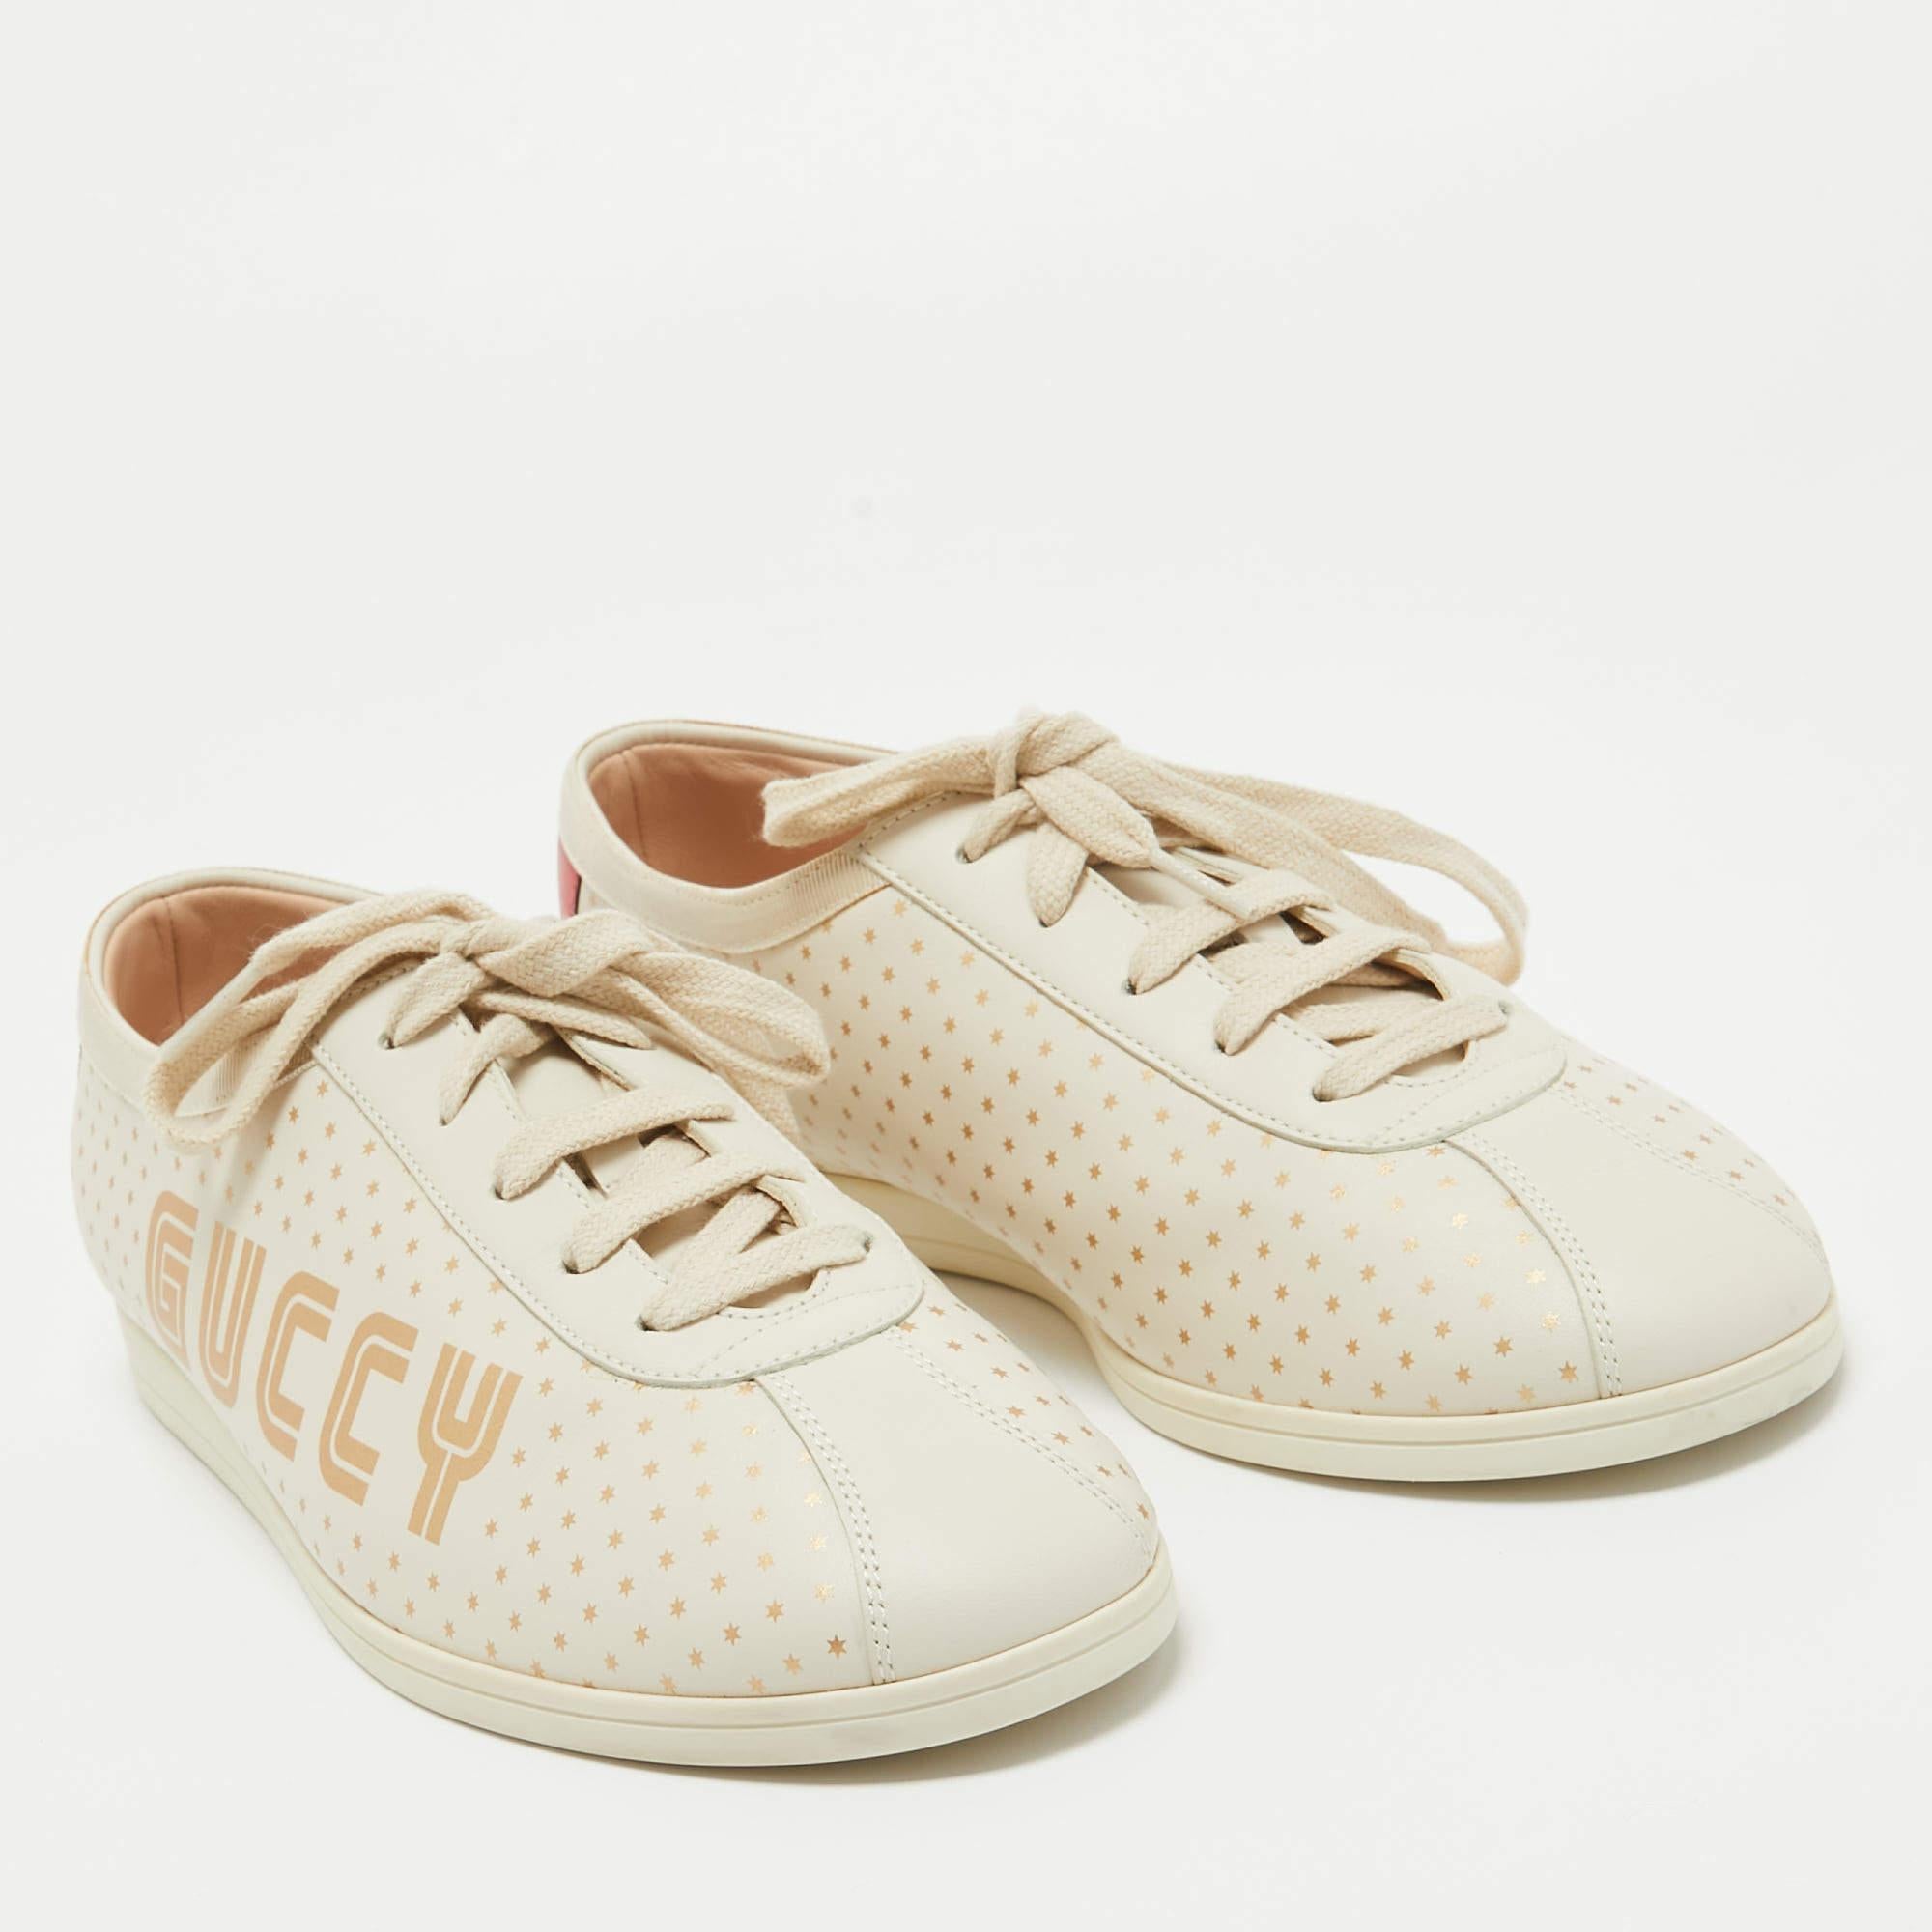 Gucci Cream Leather Falacer Low Top Sneakers Size 40 For Sale 2